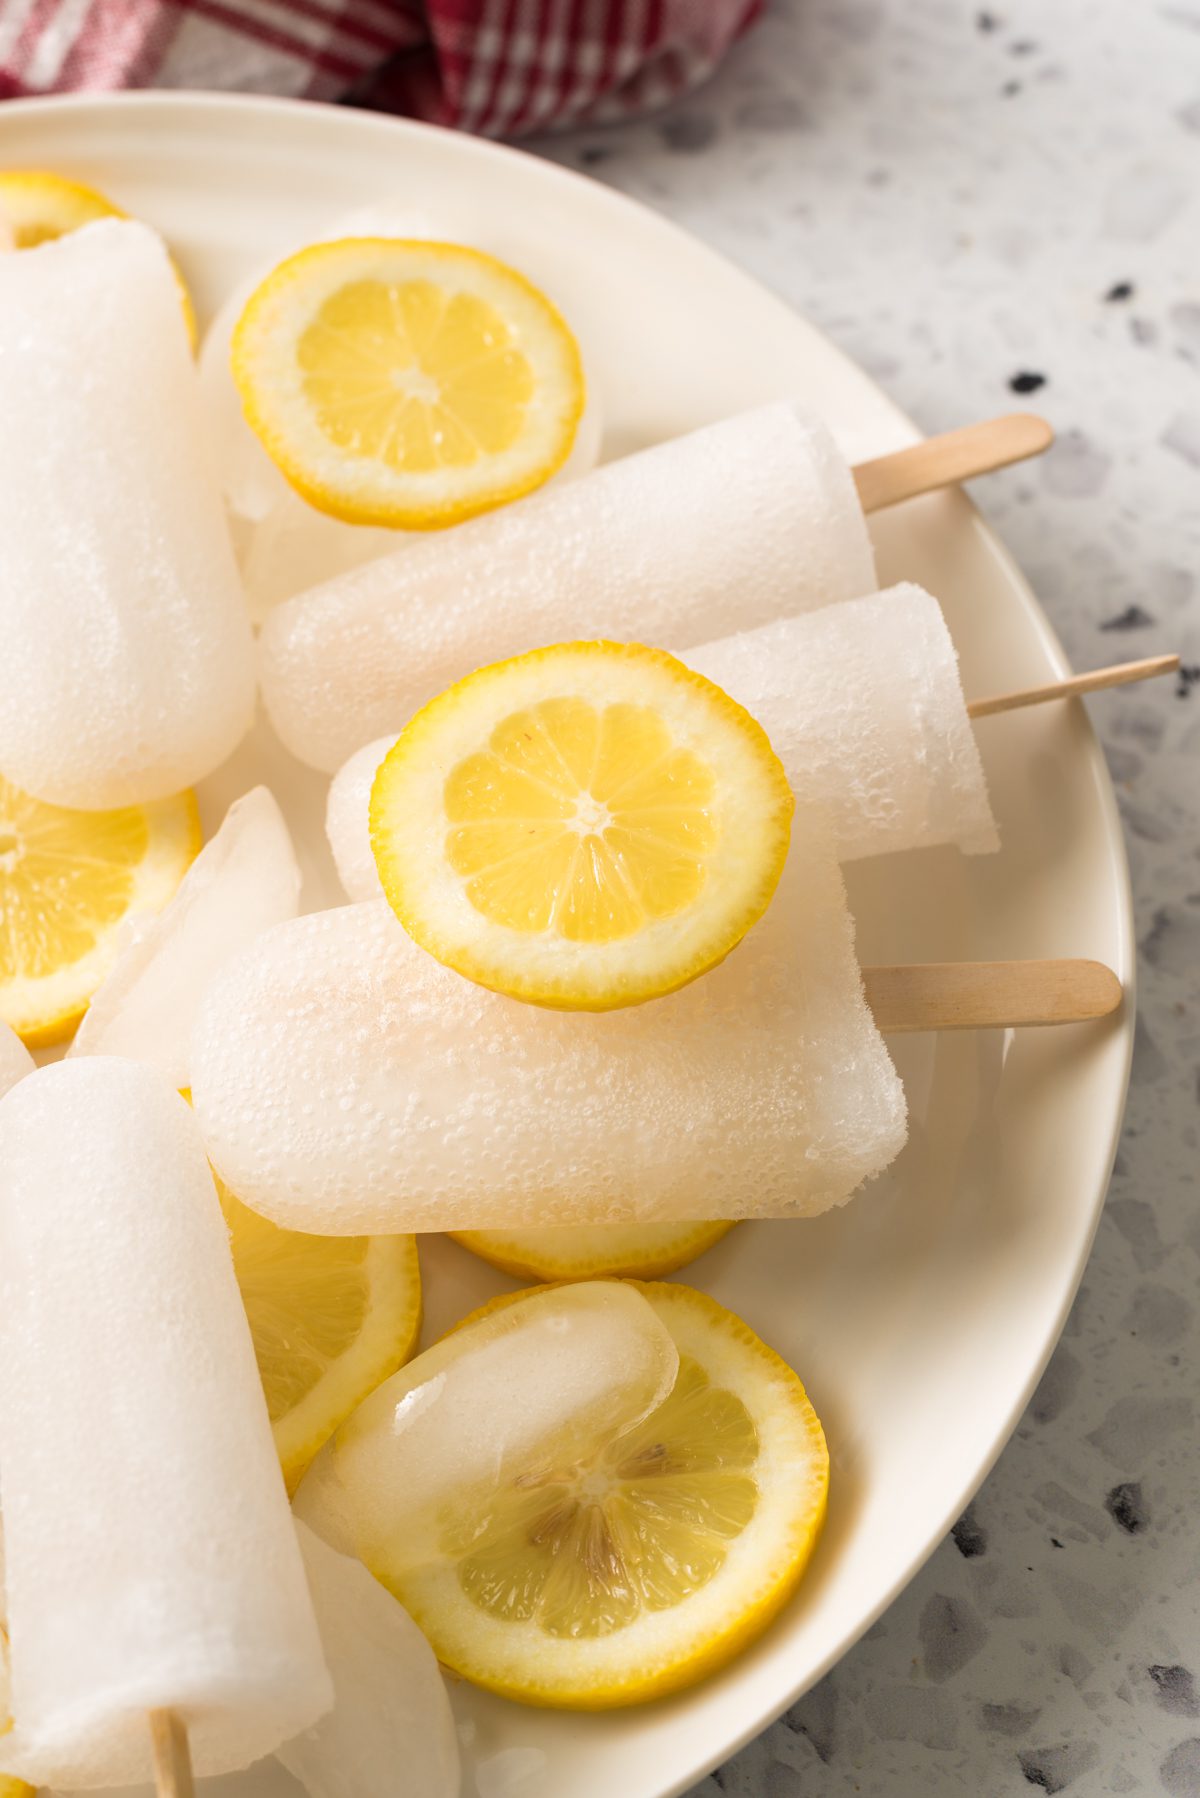 Homemade Popsicles made with Smirnoff Ice and Lemon lime soda.